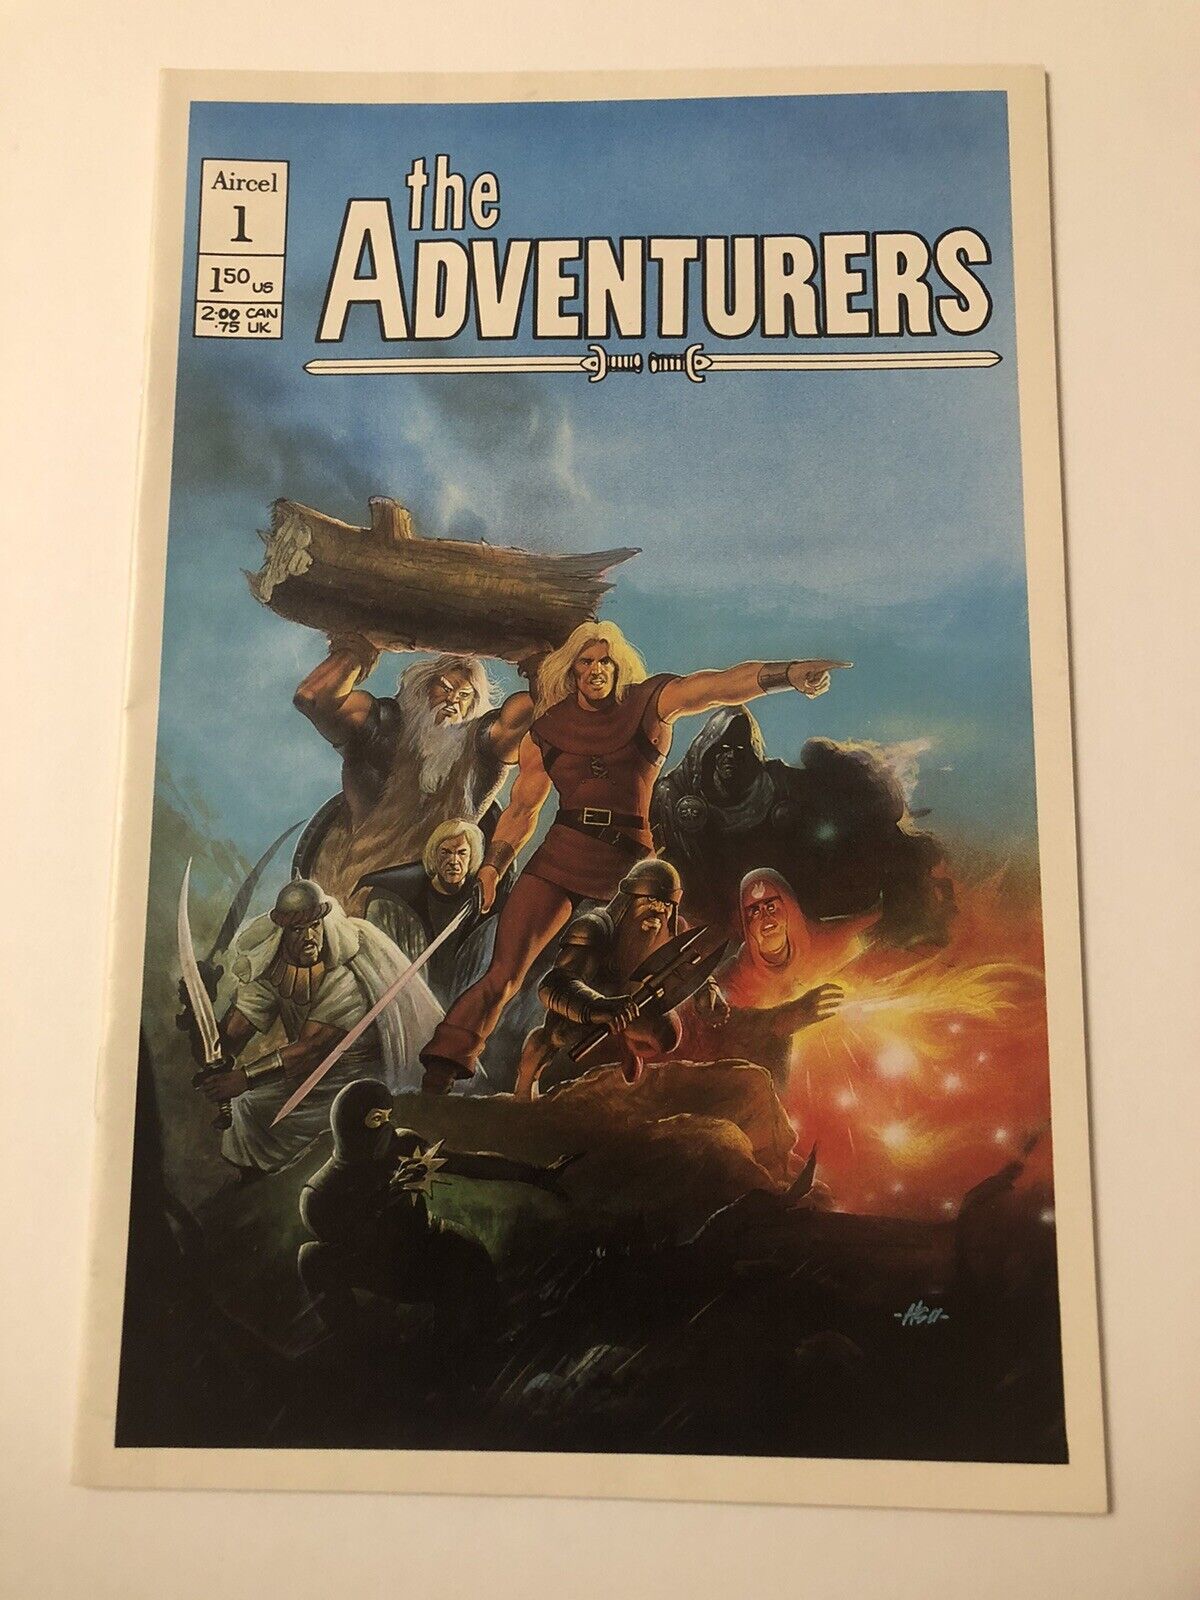 The Adventurers #1 (orginal) # 1 (variant limited) 2, 3 (two versions) 4 and 0. 